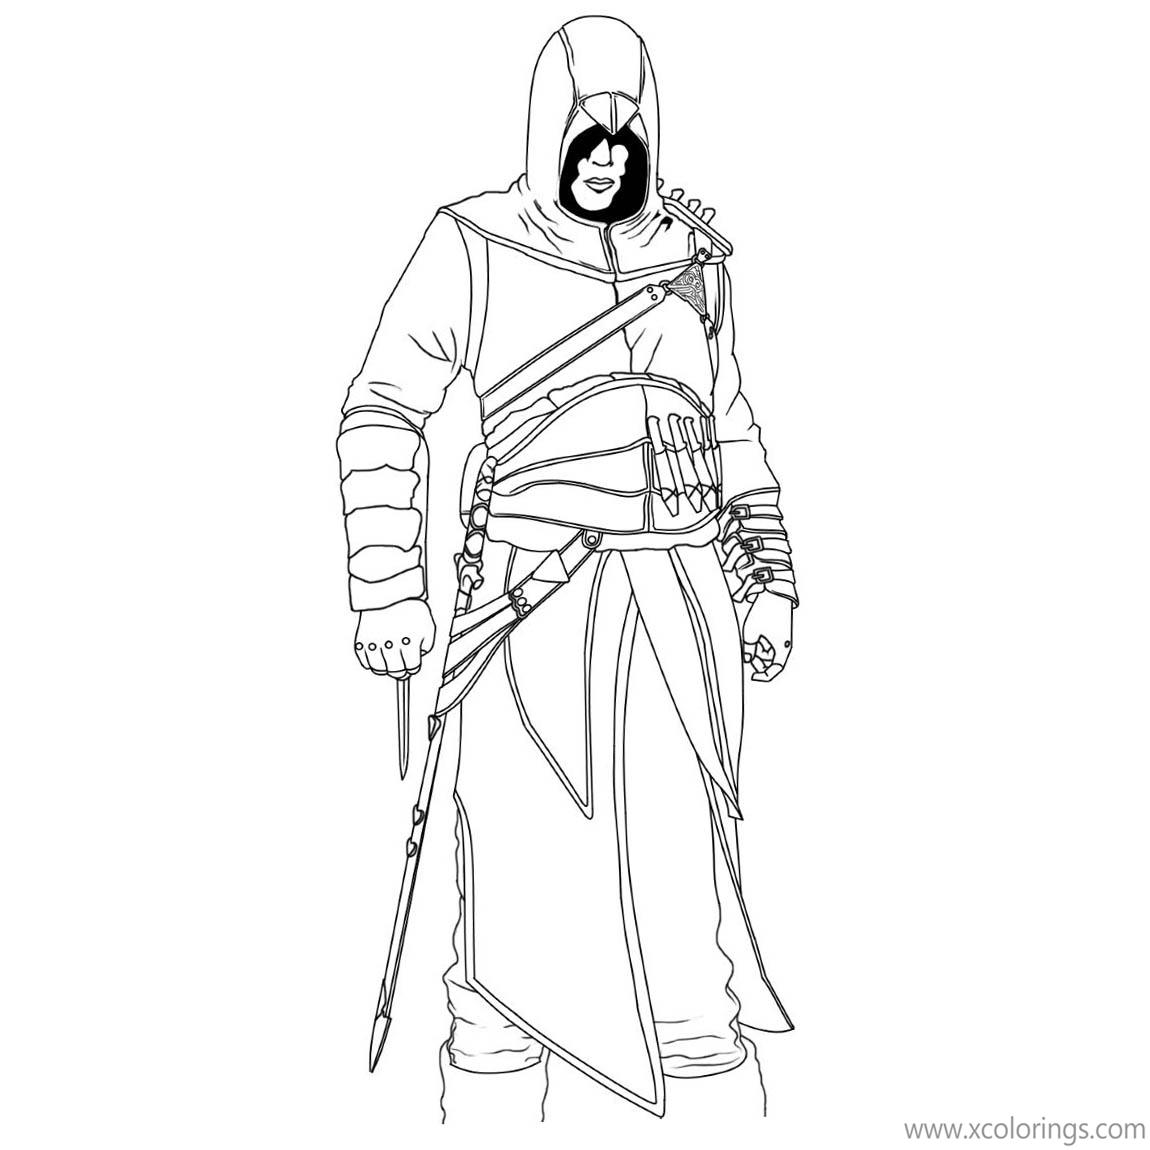 Free Altair from Assassin's Creed Characters Coloring Pages printable